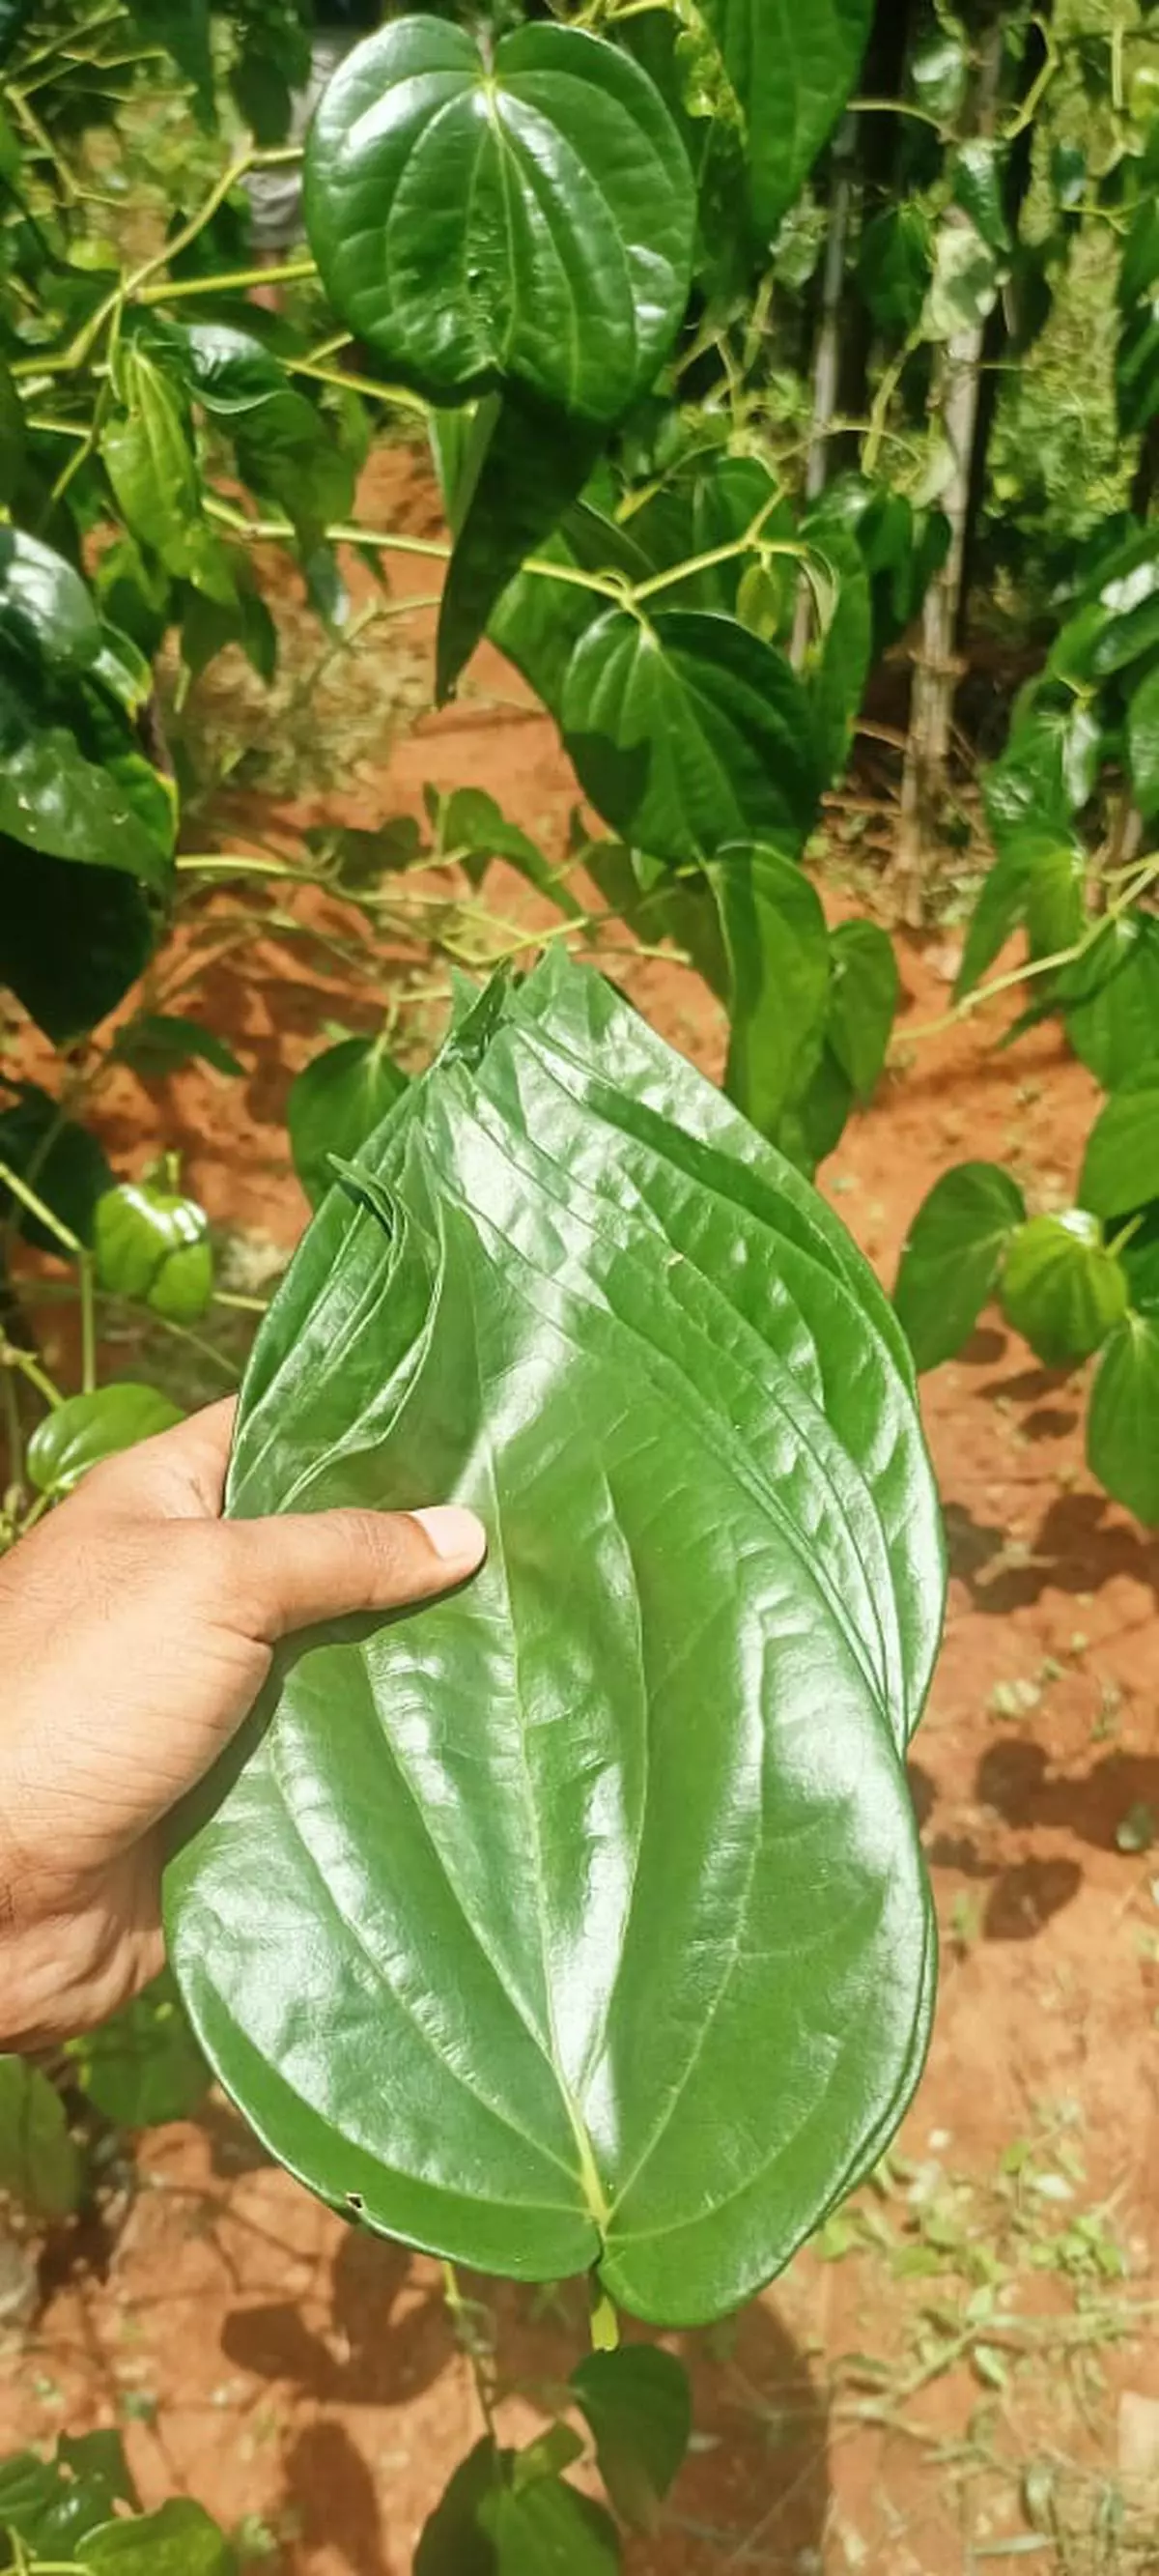 GI-tagged Tirur betel leaf is cultivated in around 600 acres in Tirur, Malappuram 